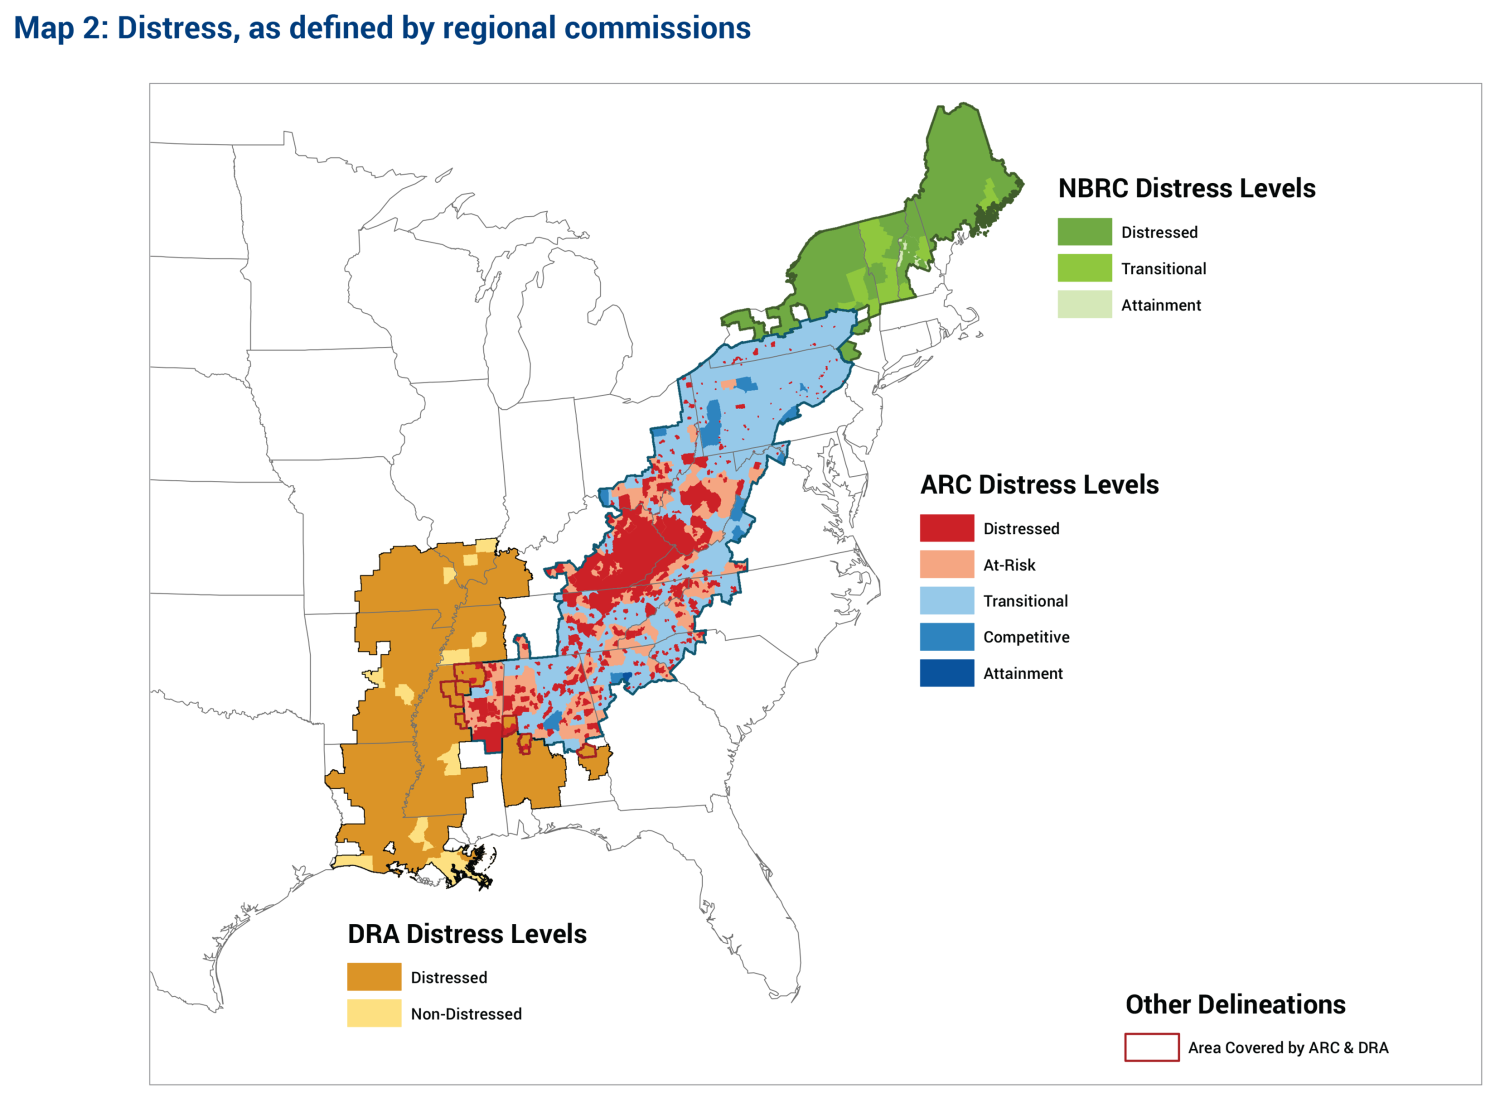 Distress, as defined by regional commissions